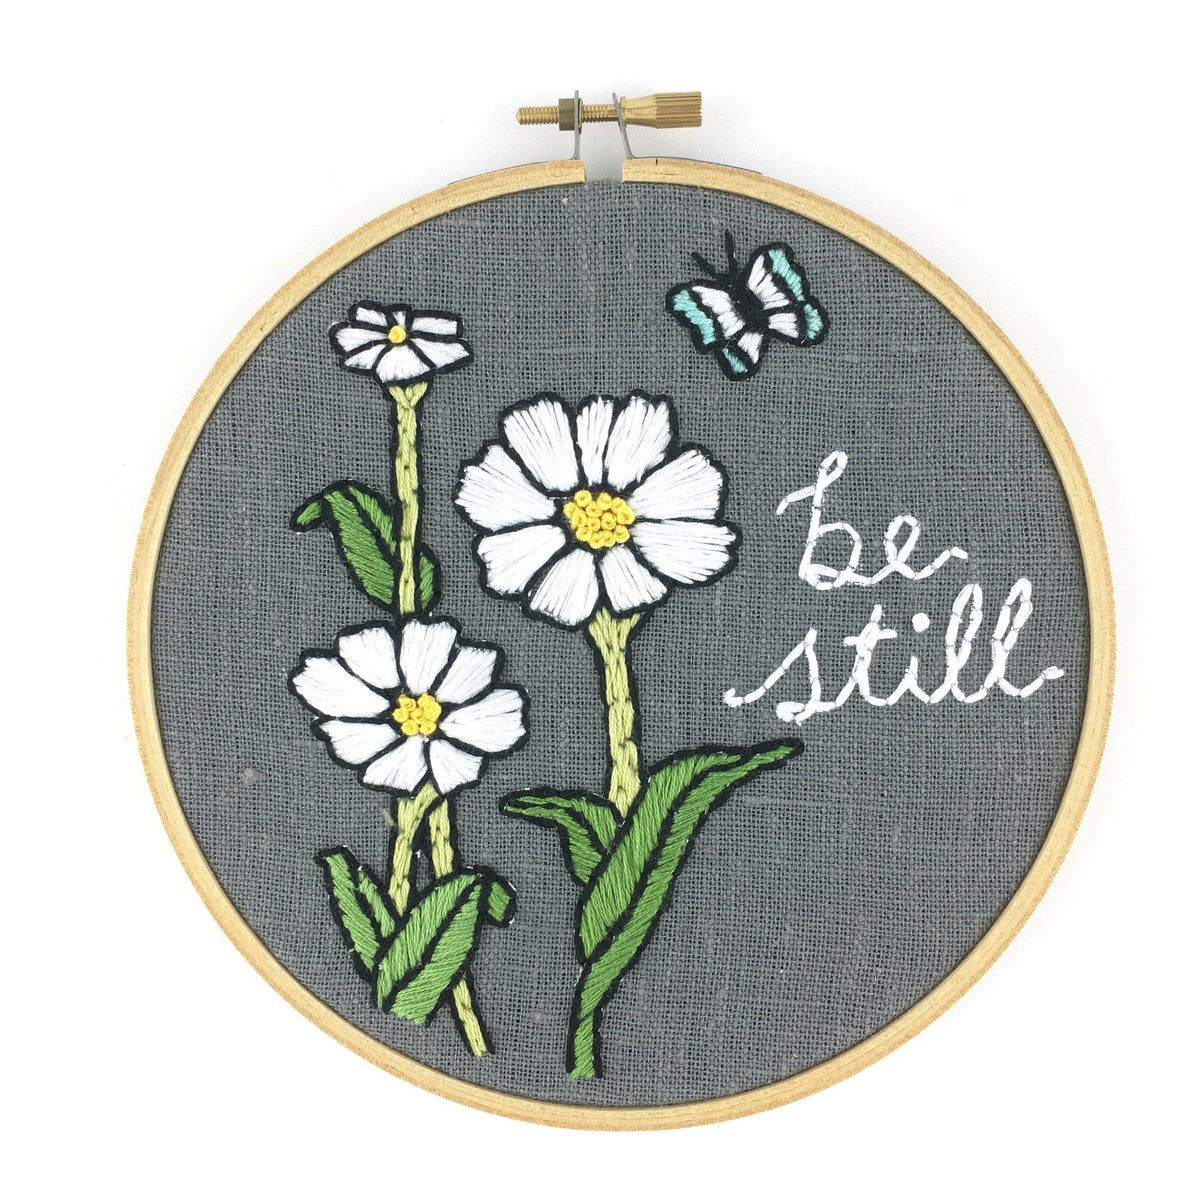 Be Still Embroidery Kit